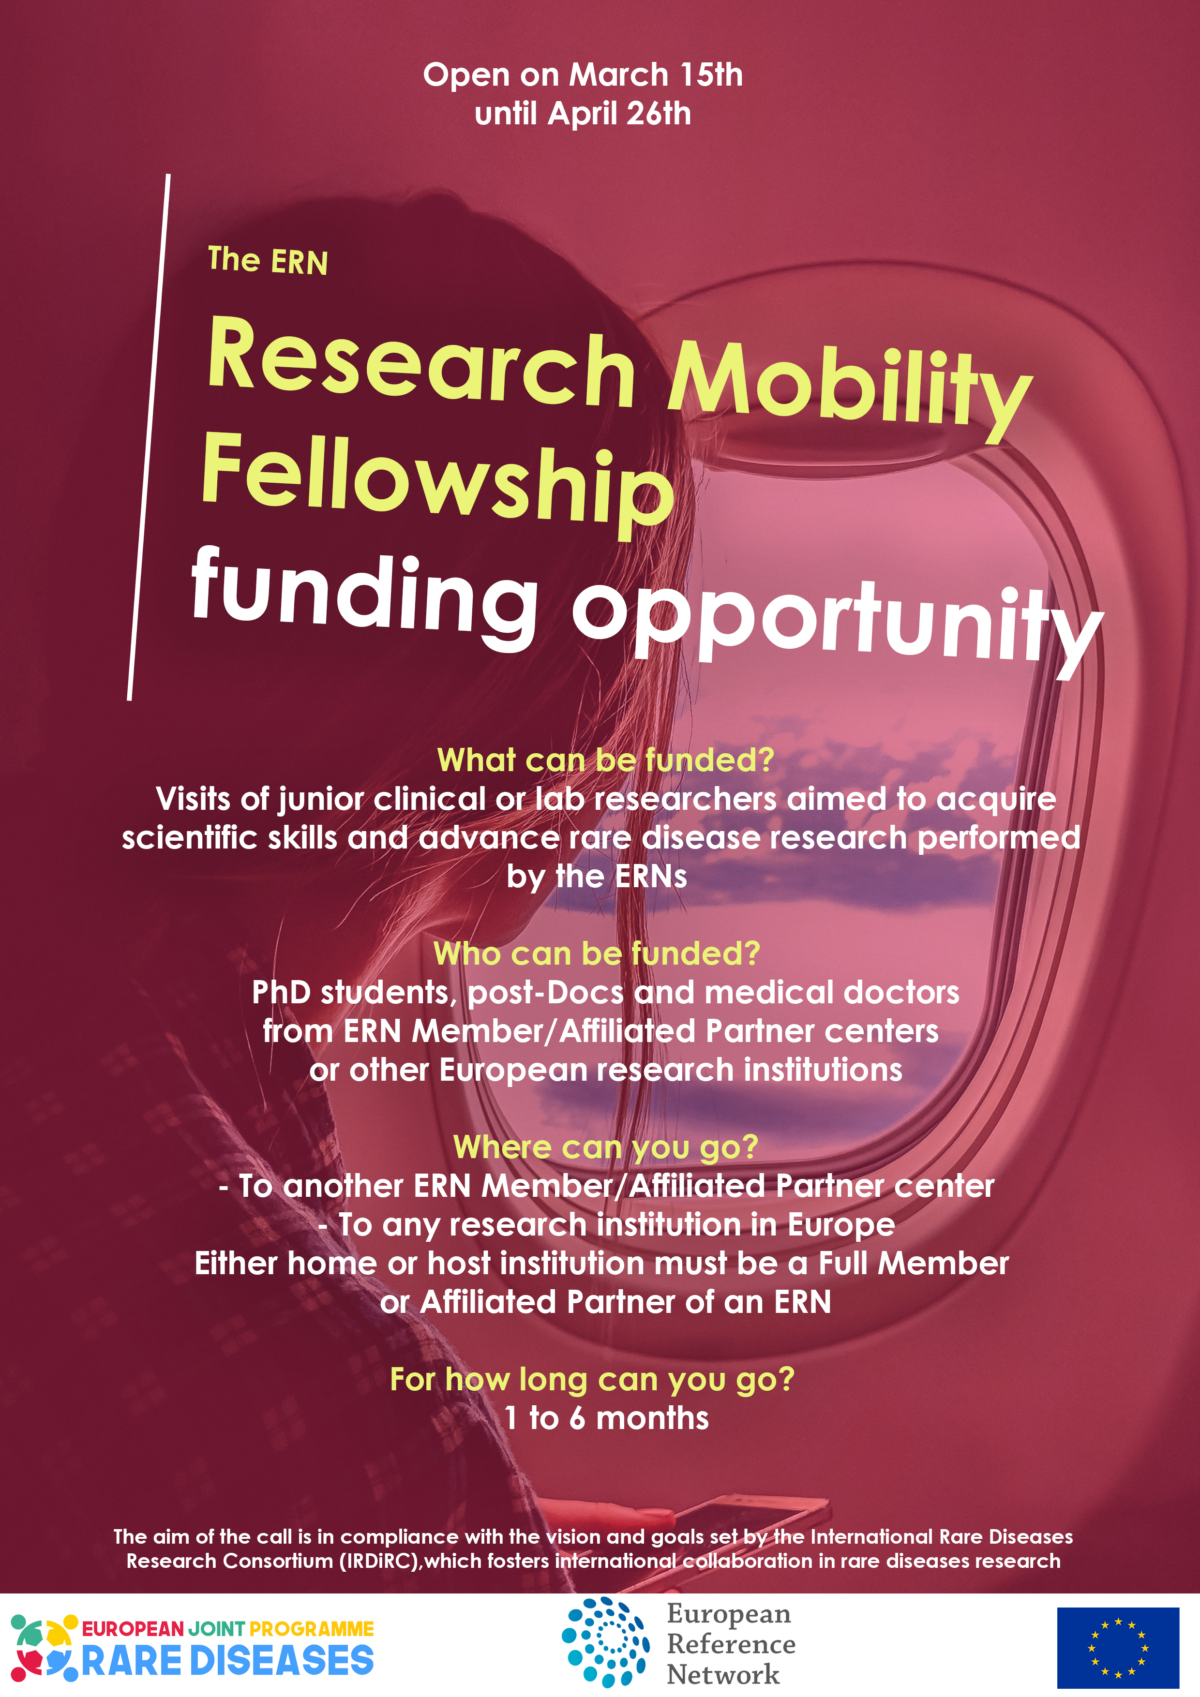 EJP RD – ERN Research Mobility Fellowship funding opportunity